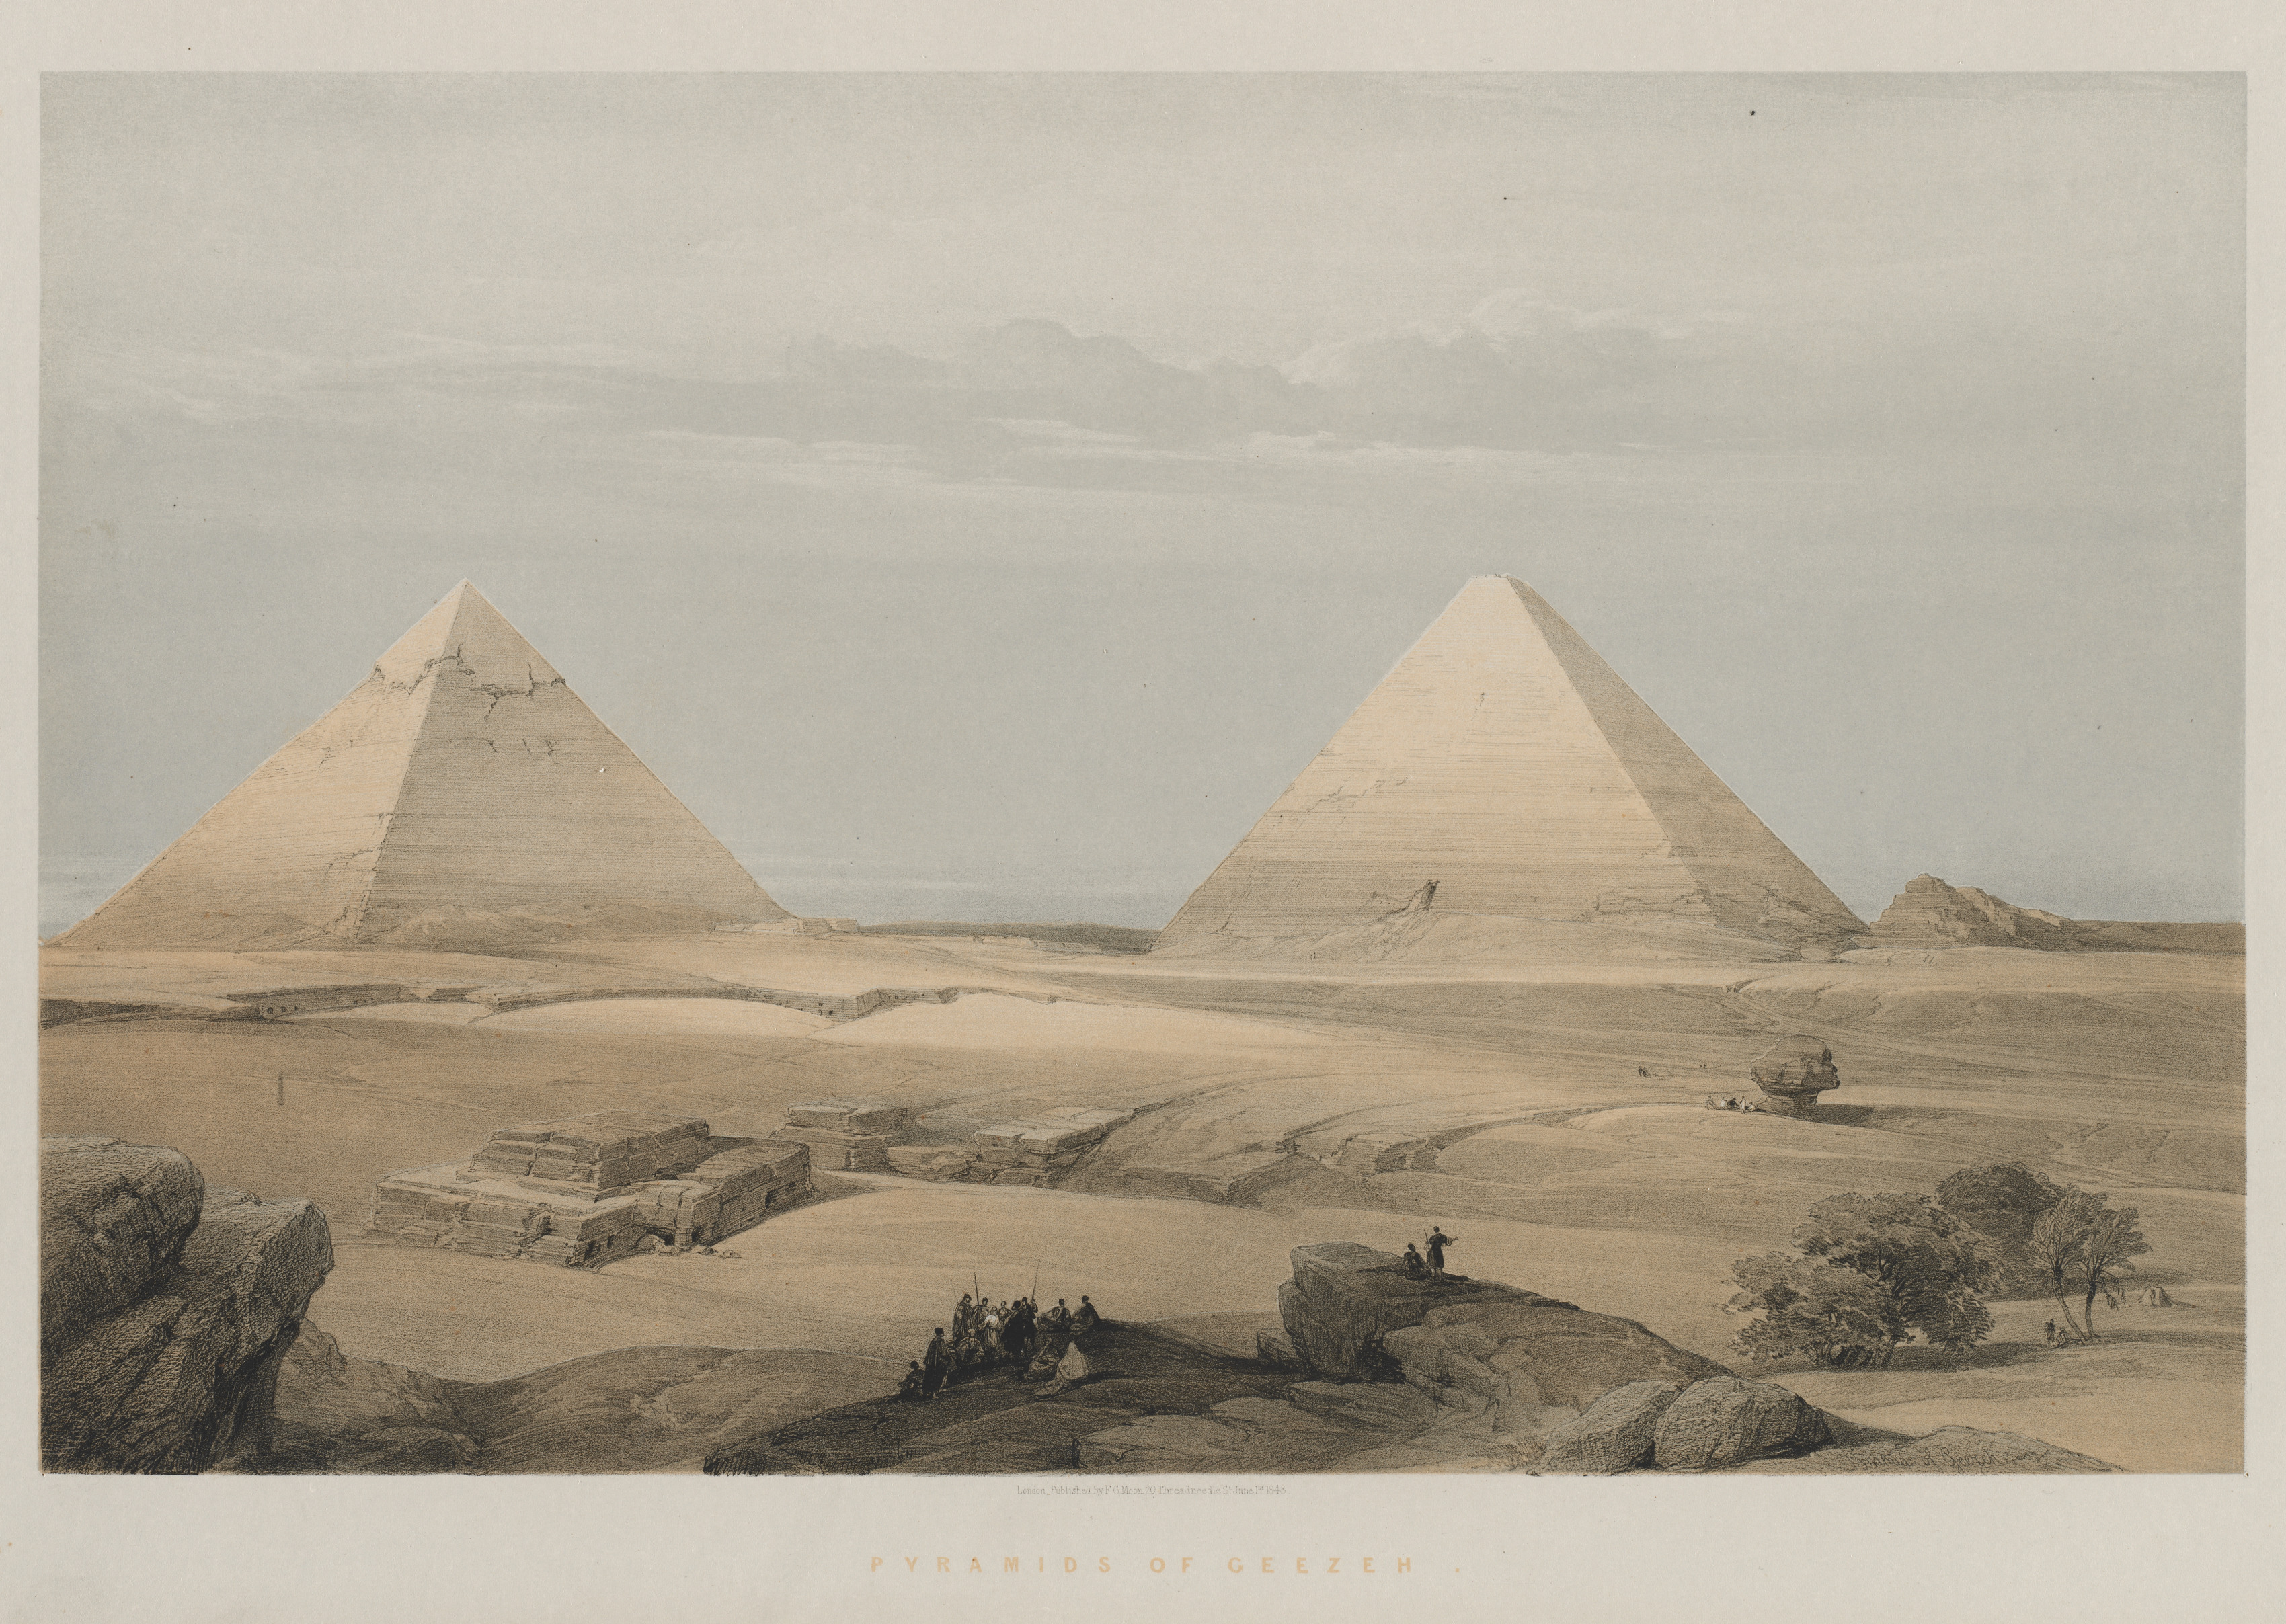 Egypt and Nubia, Volume II: Pyramids of Geezeh